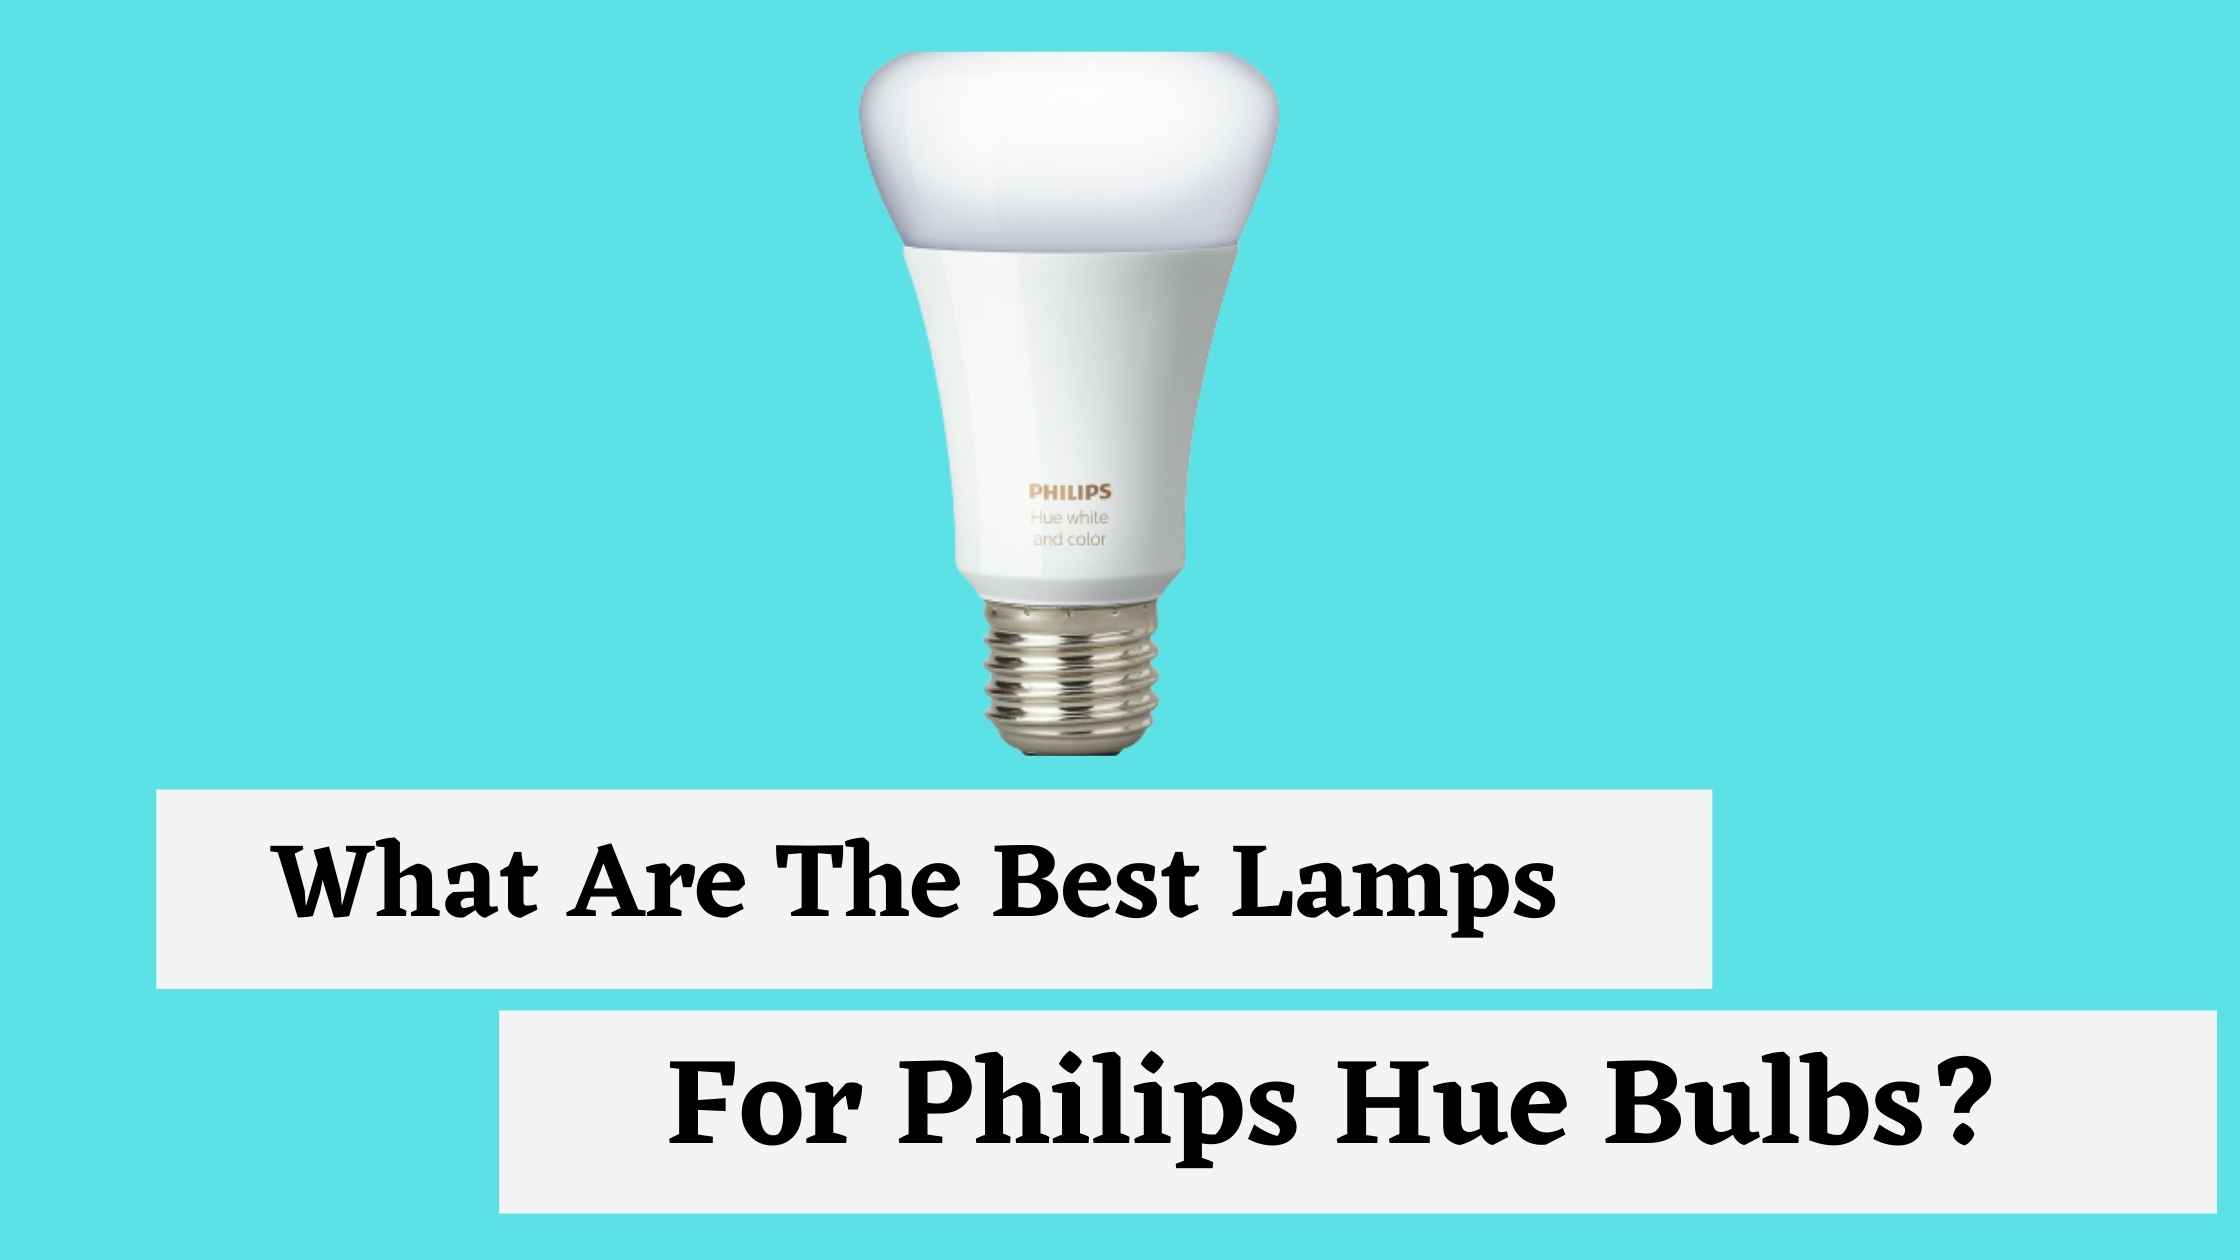 What Are The Best Lamps For Philips Hue Bulbs?